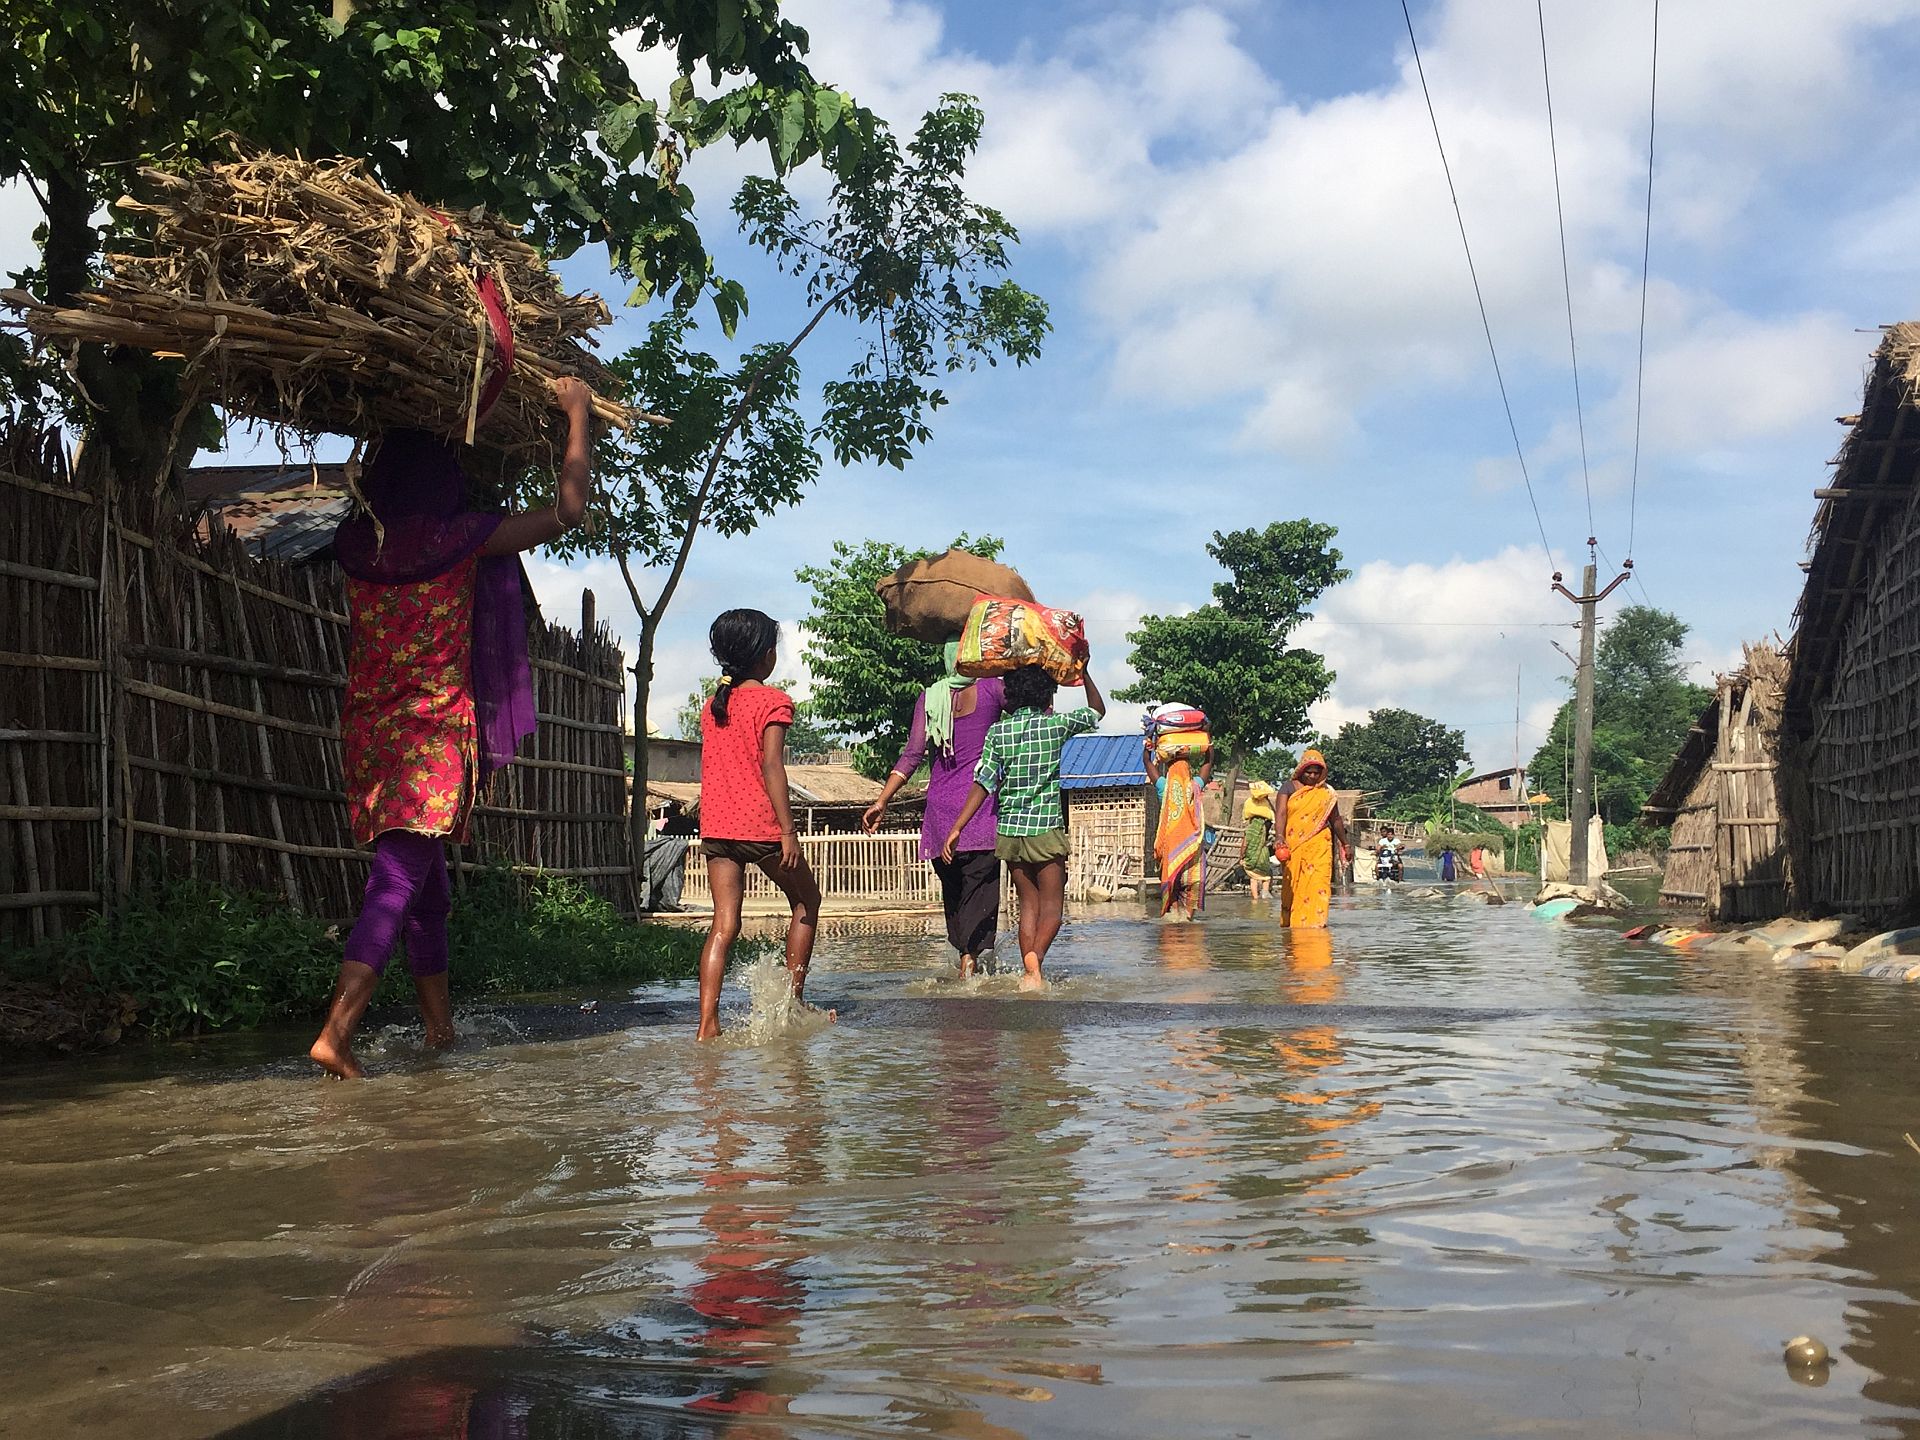 Villagers moving to safer areas due to floods in Bihar, India. Photo: Dr Dakshina Murthy / IWMI